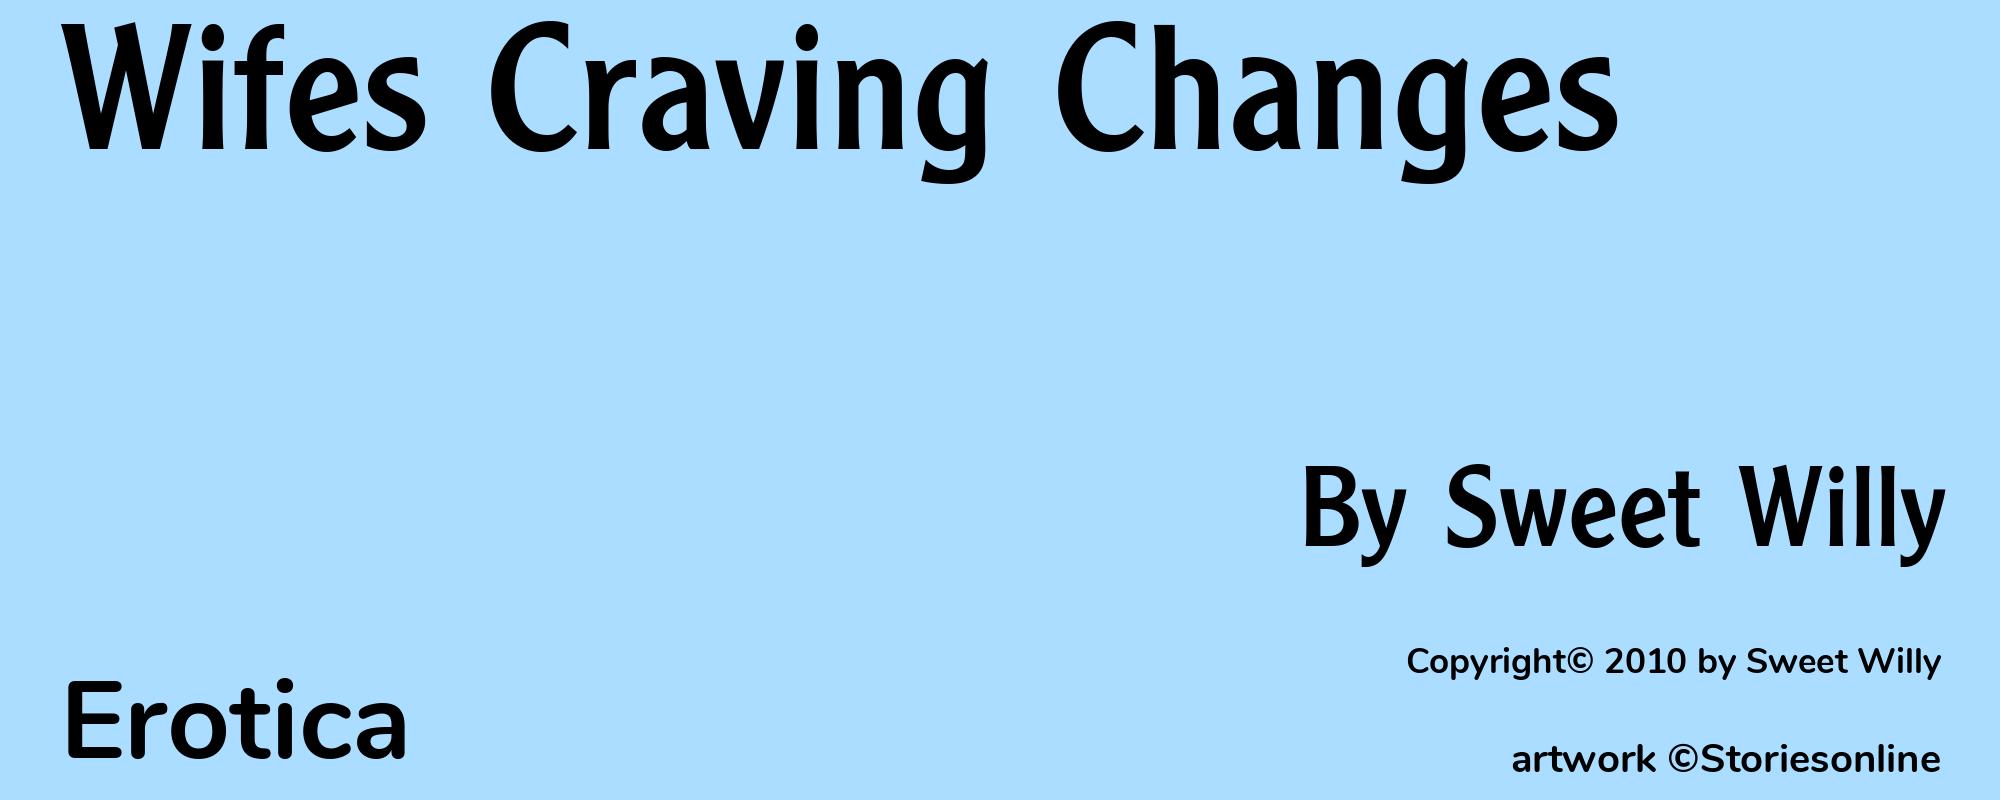 Wifes Craving Changes - Cover